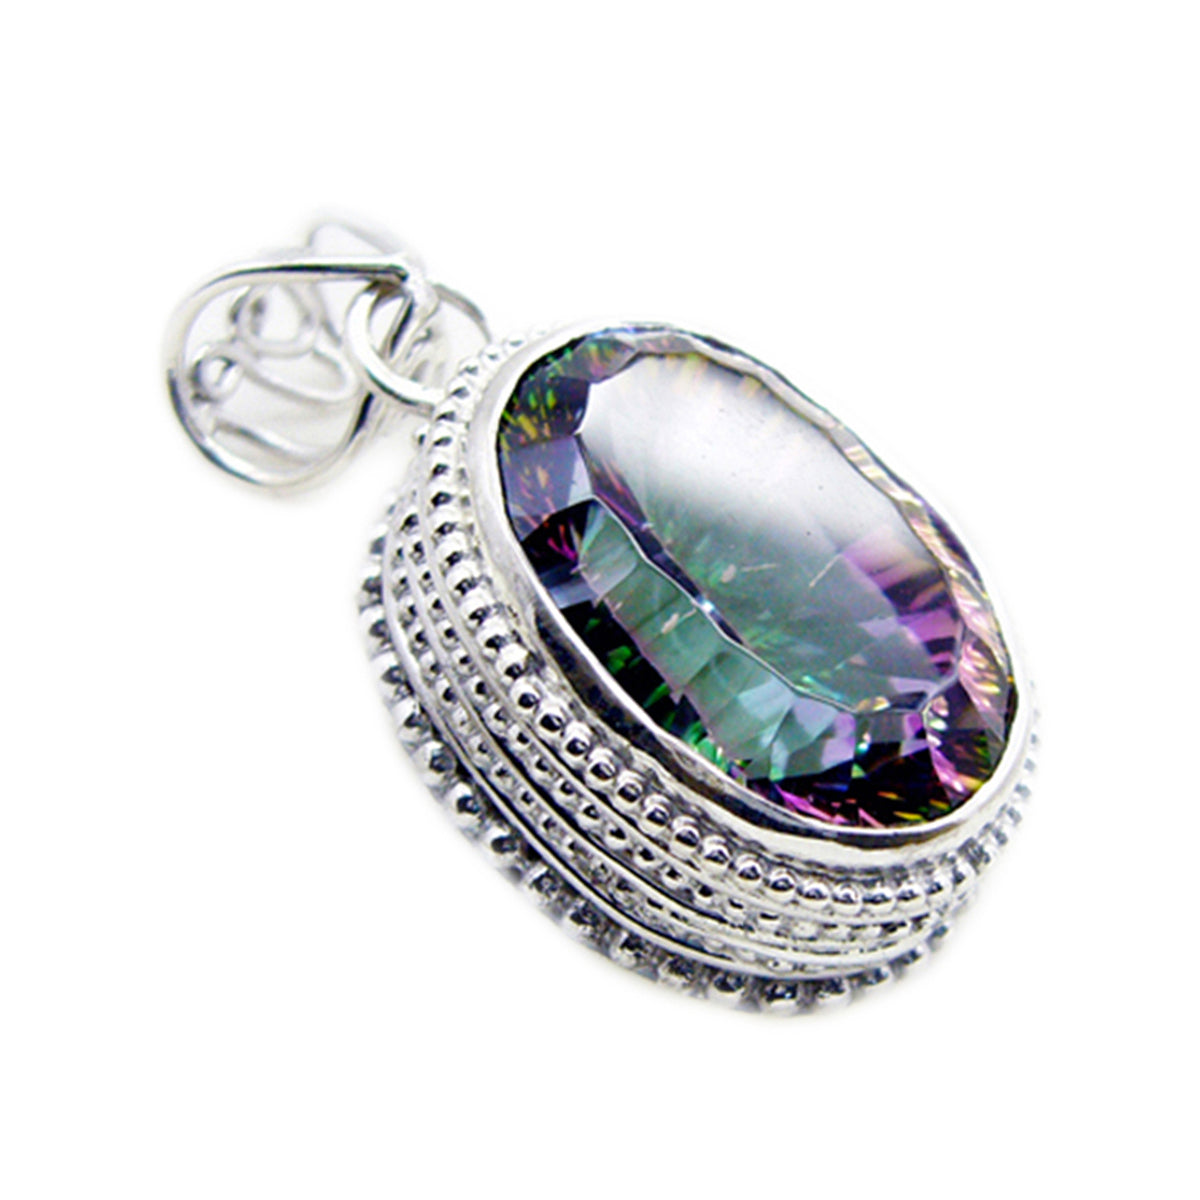 Riyo Charming Gemstone Oval Faceted Multi Color Mystic Quartz Sterling Silver Pendant Gift For Women